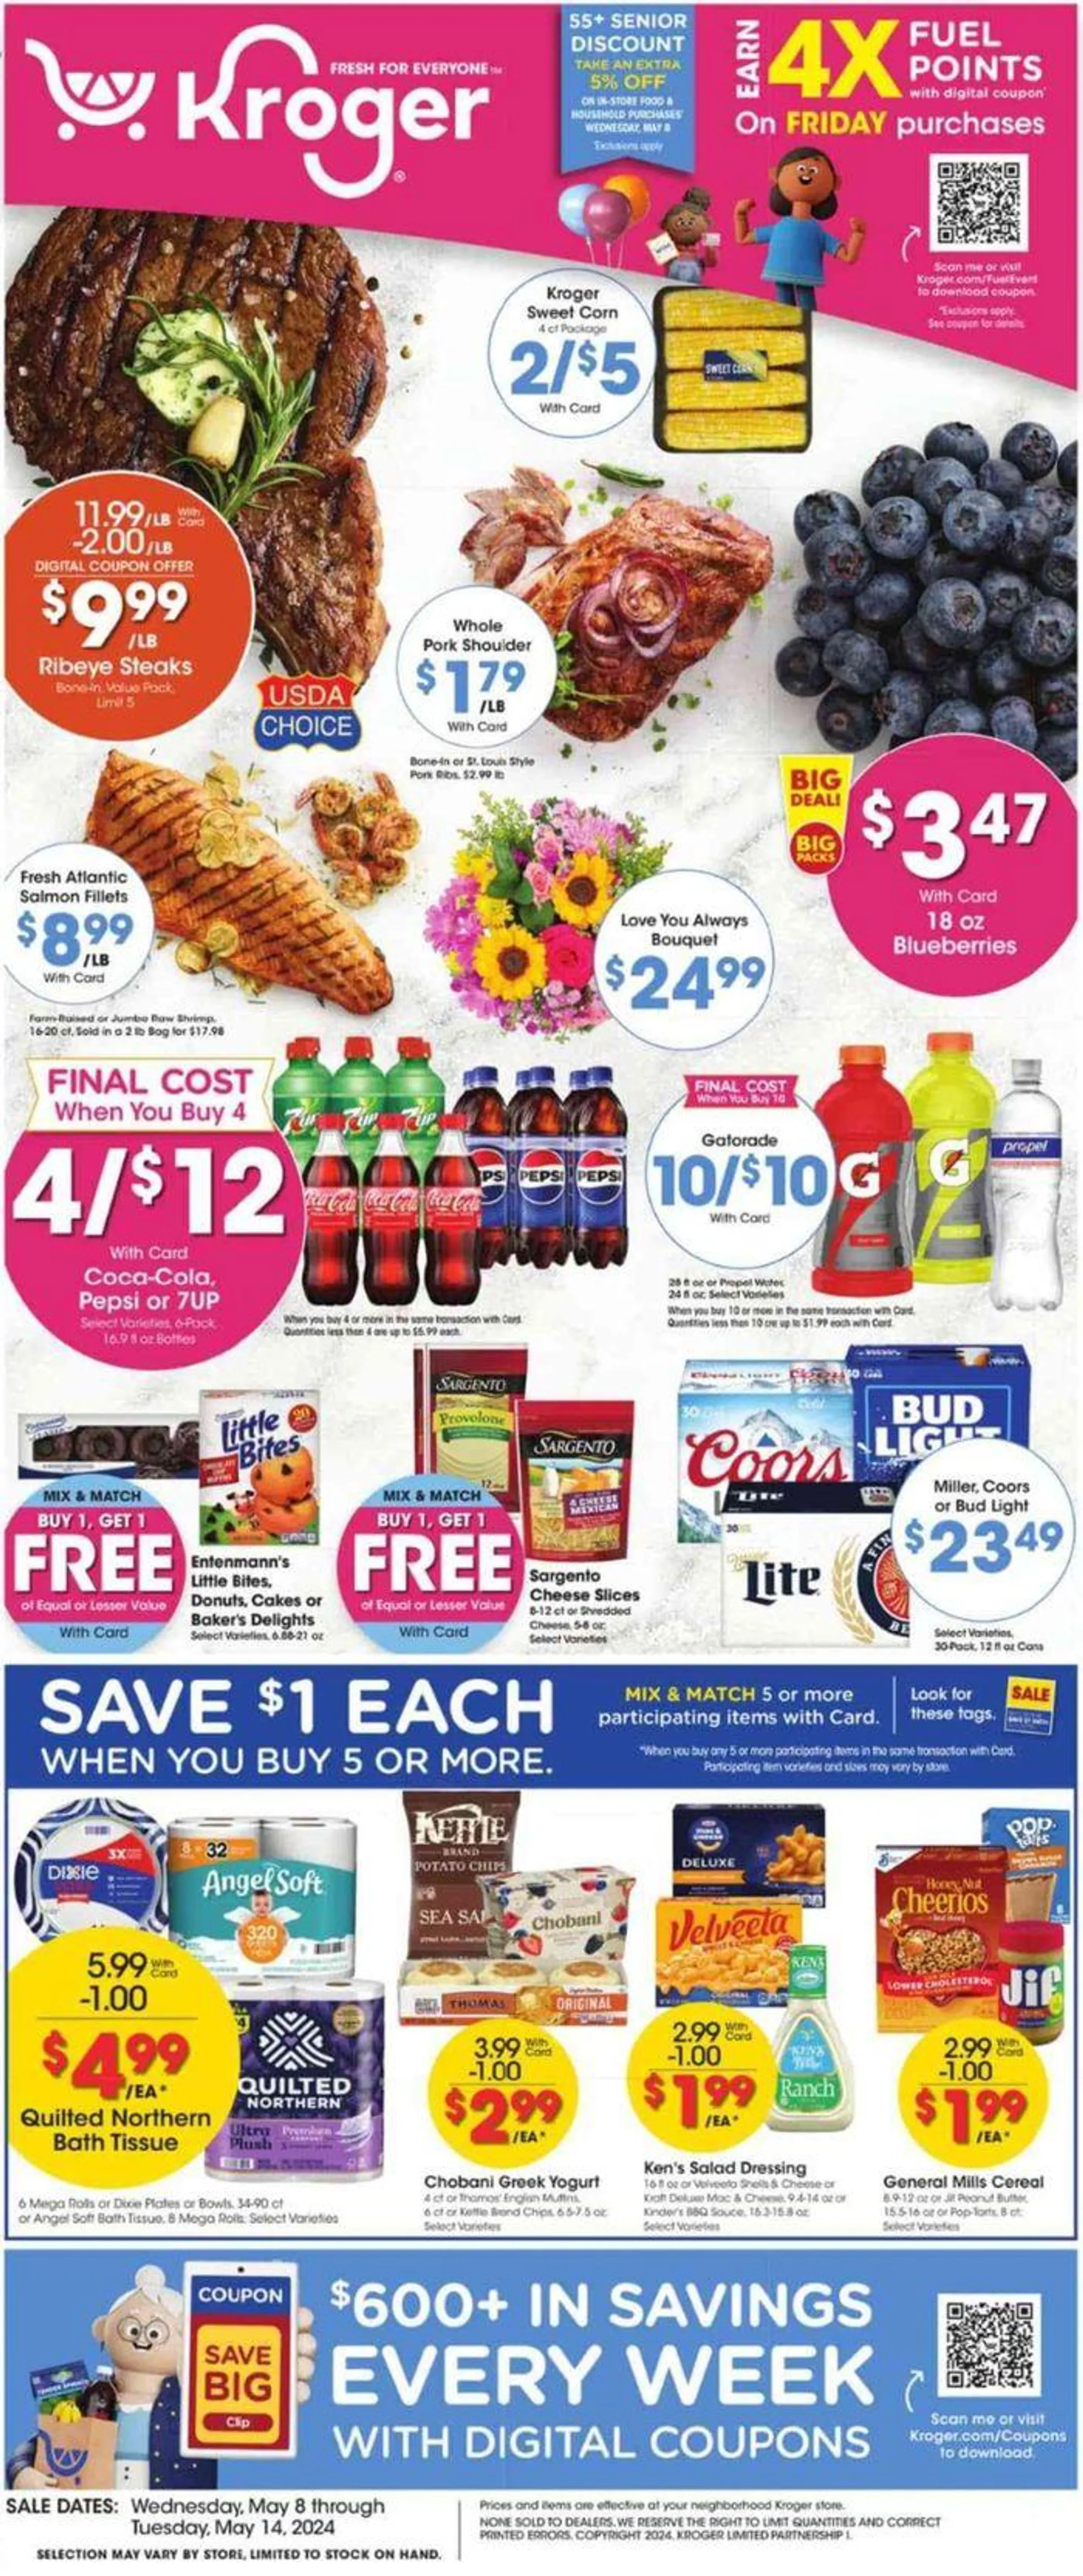 Weekly Ads 08/05 - 1